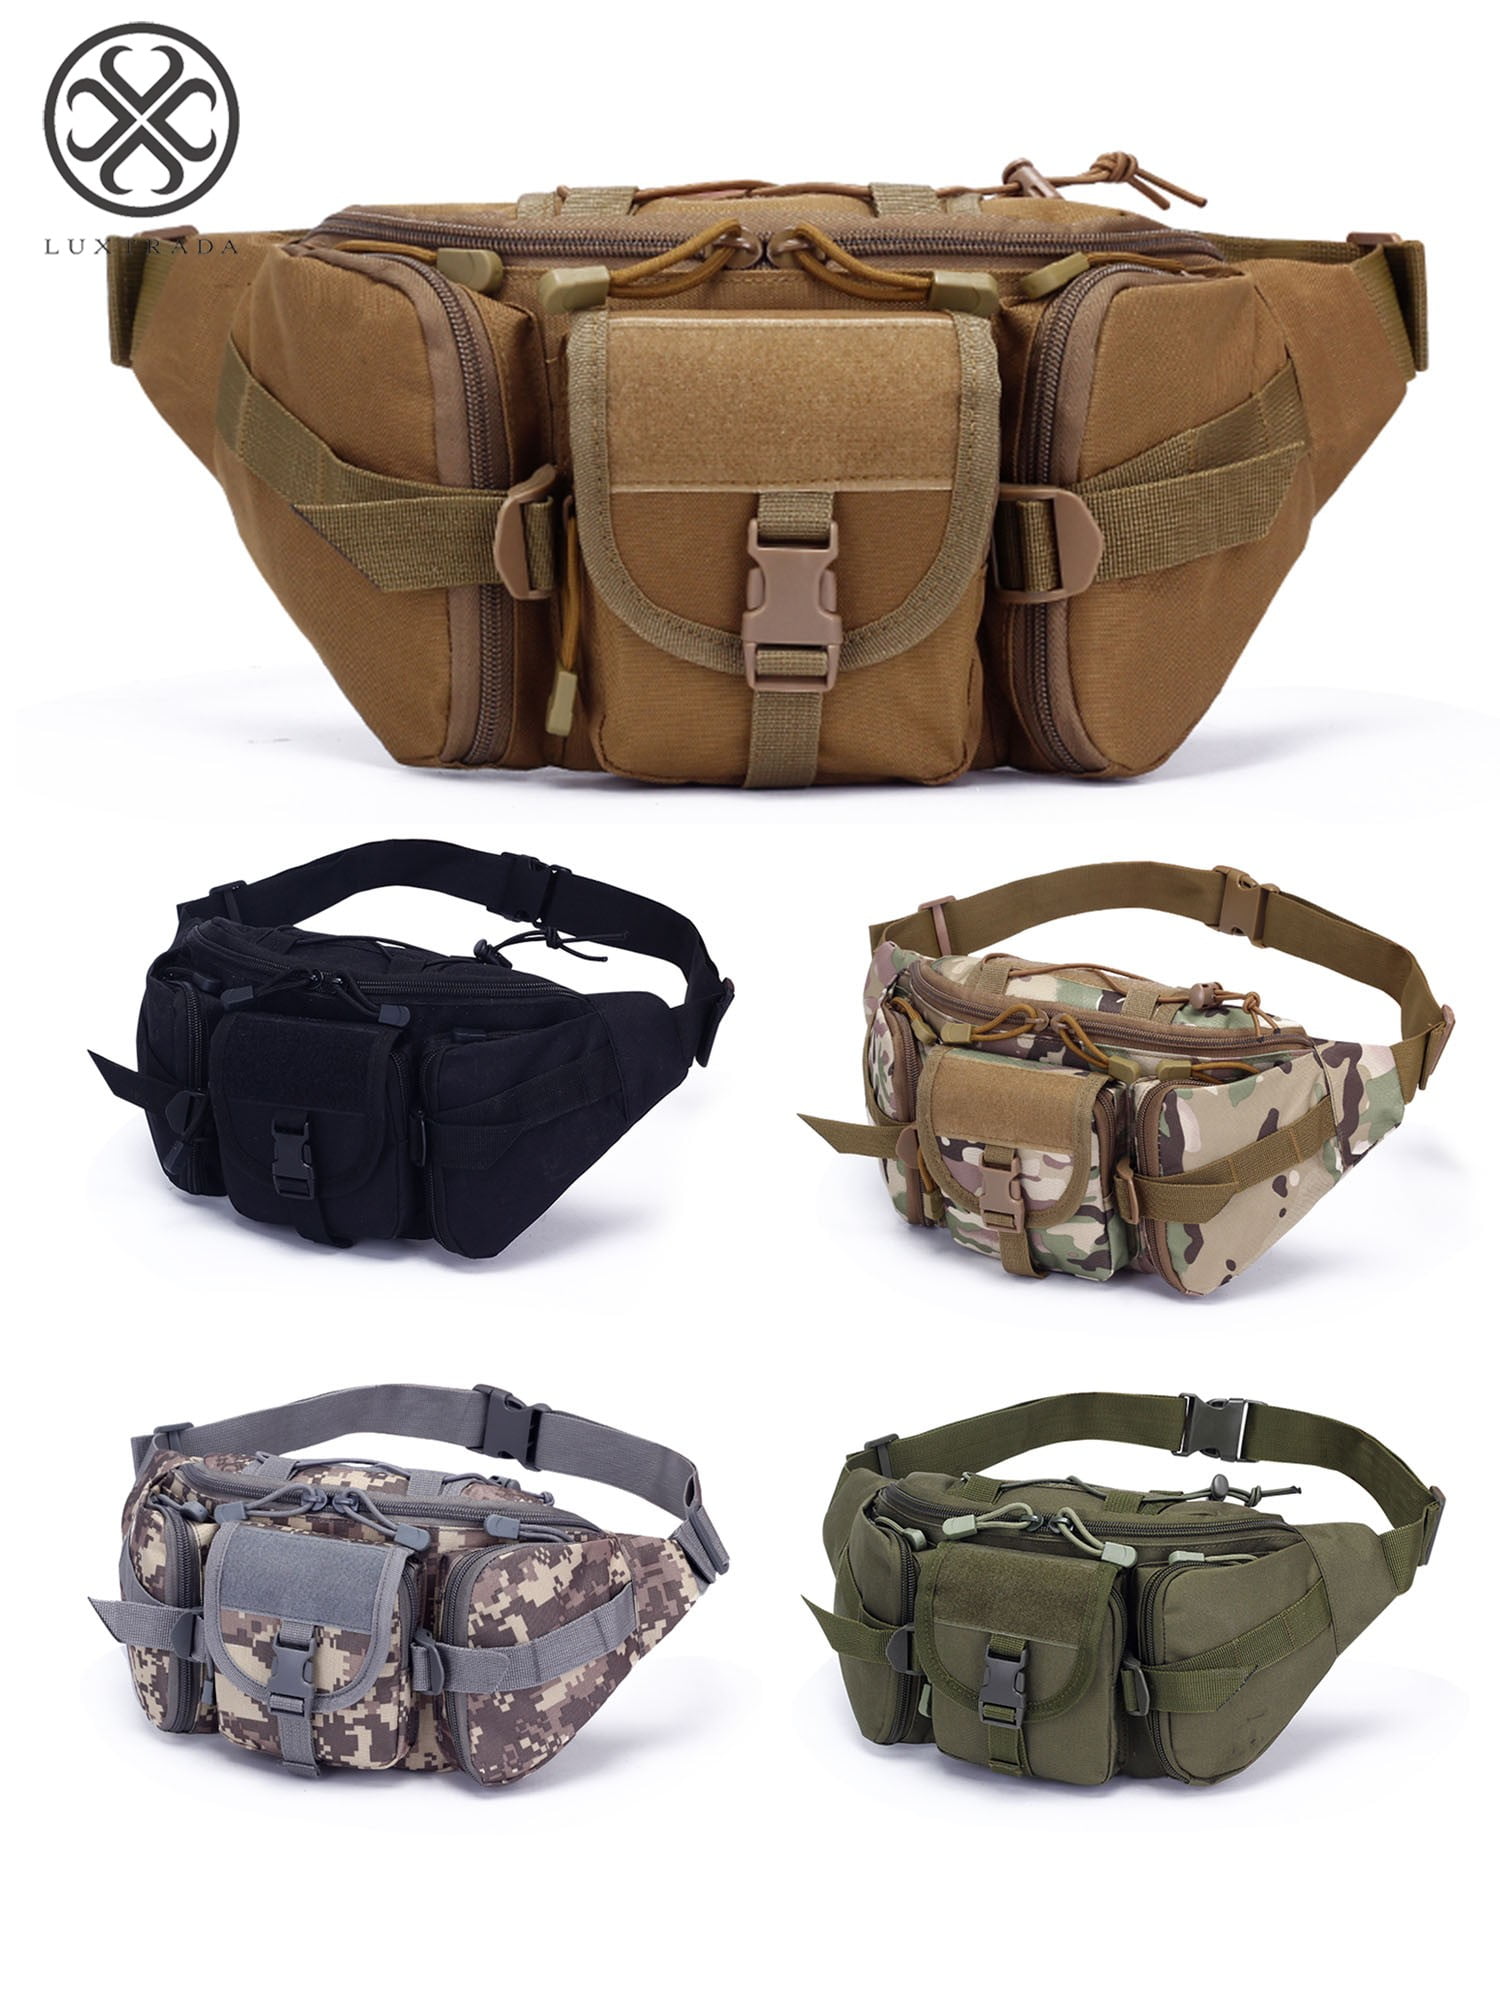 Tactical Waist Bags Outdoor Military Fanny Pack Camping Hiking Messenger Pocket